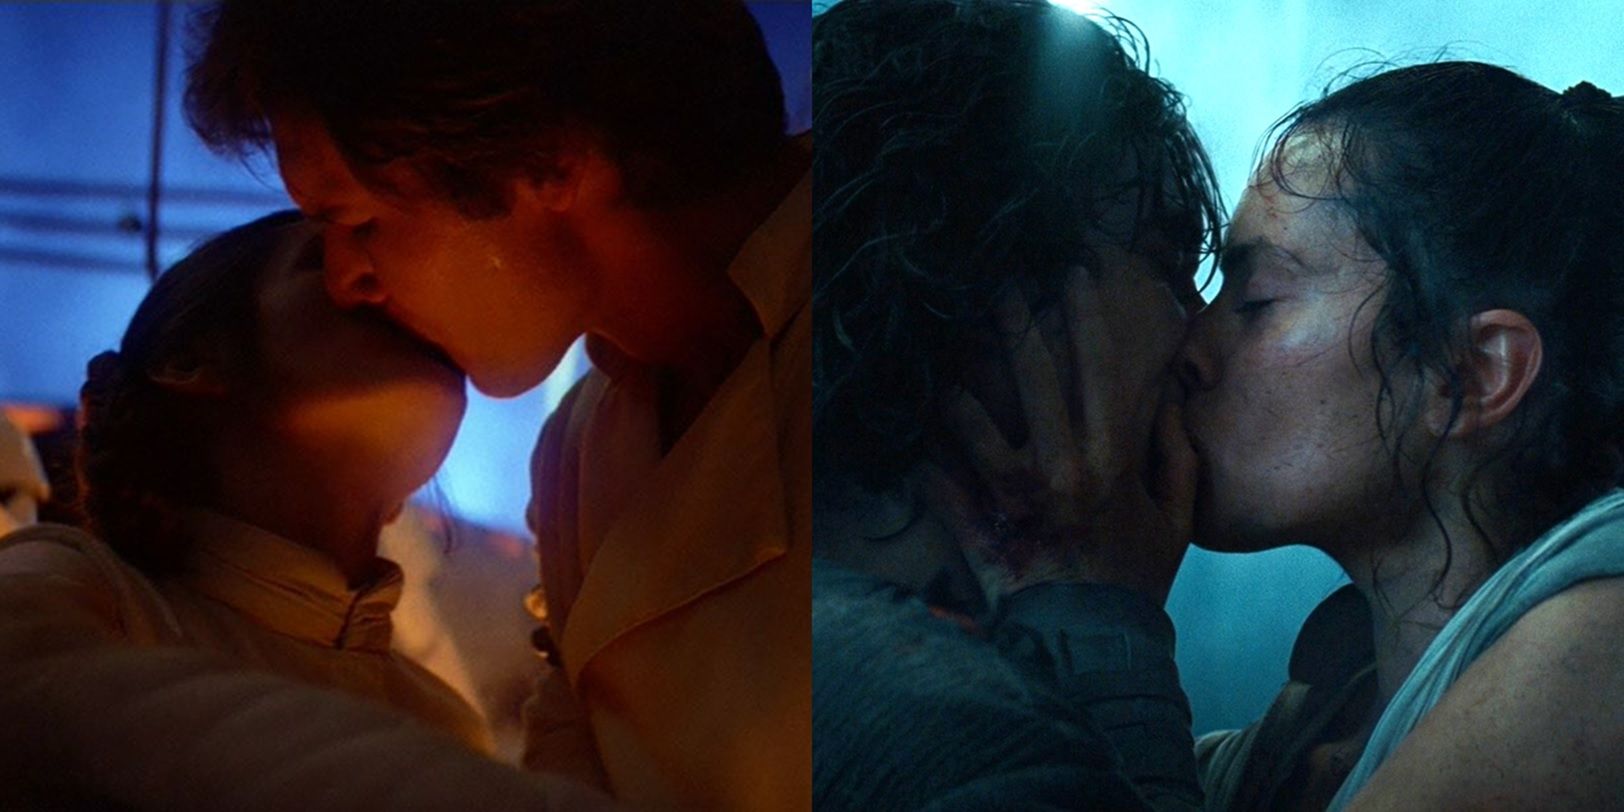 Star Wars: Why Han & Leia Are The Saga's Best Romance (& Why Reylo Is The Worst)